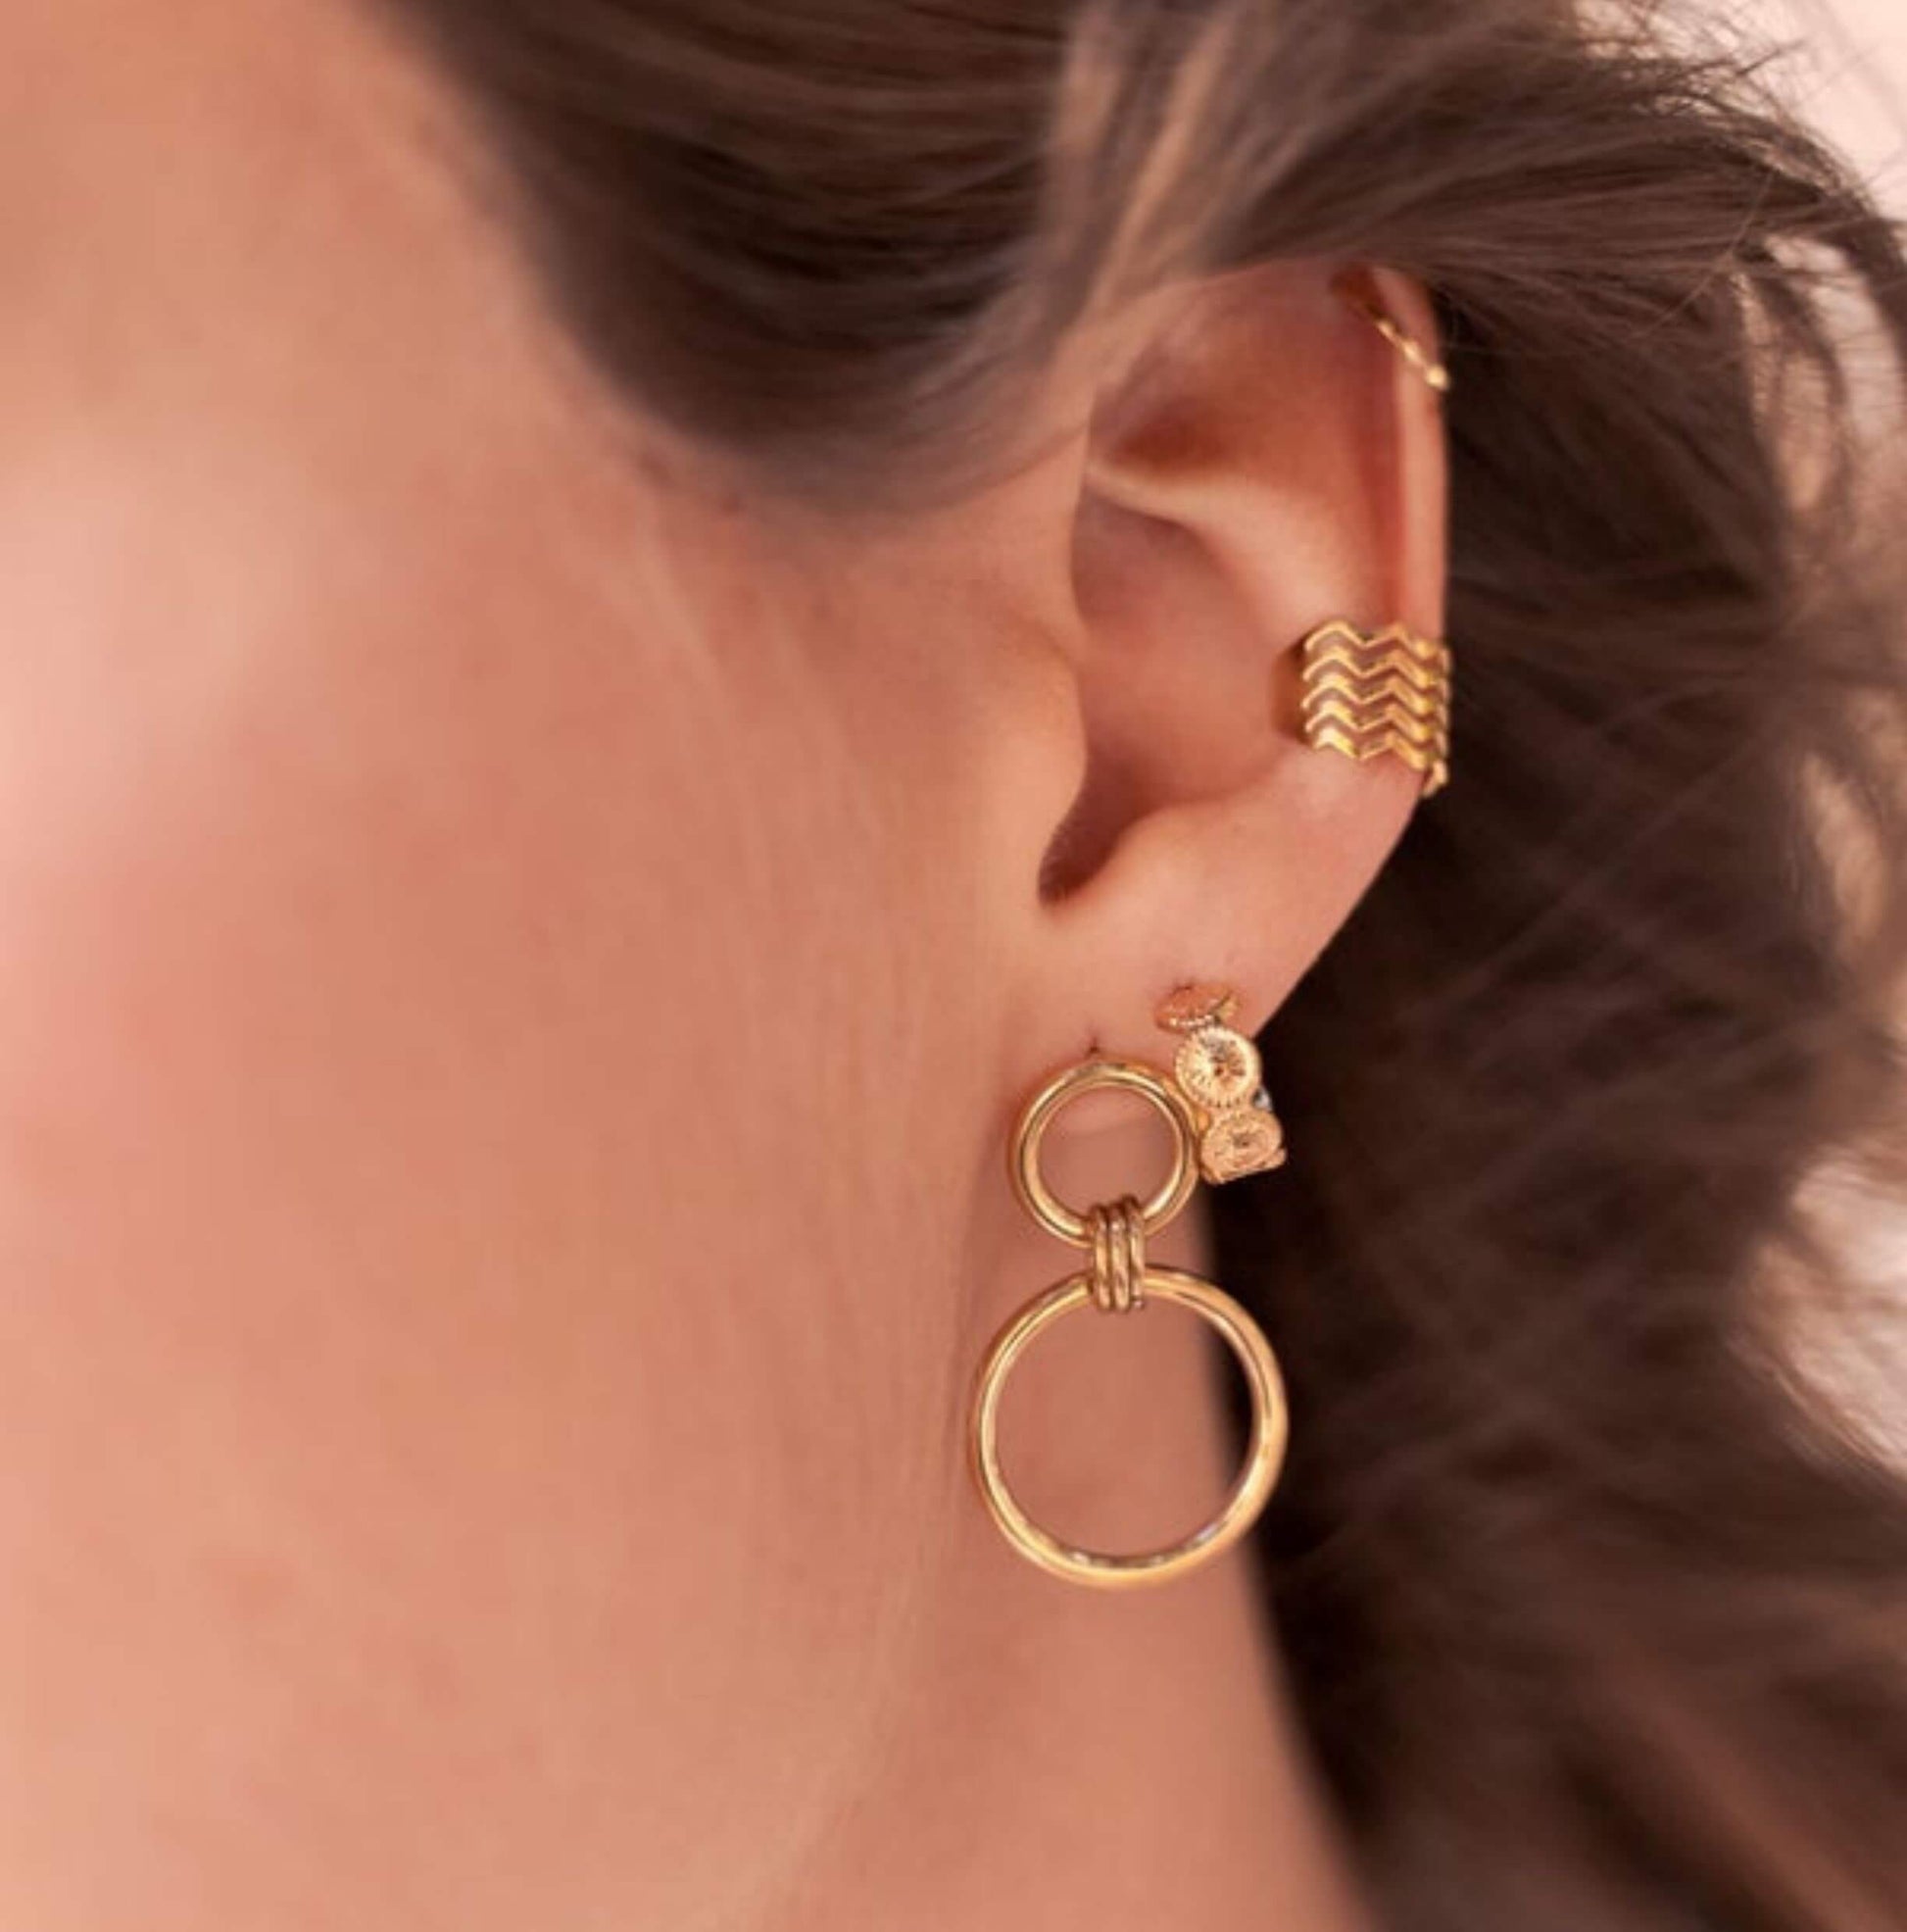 Golden Earrings Quincy Stainless Steel - Unik by Nature